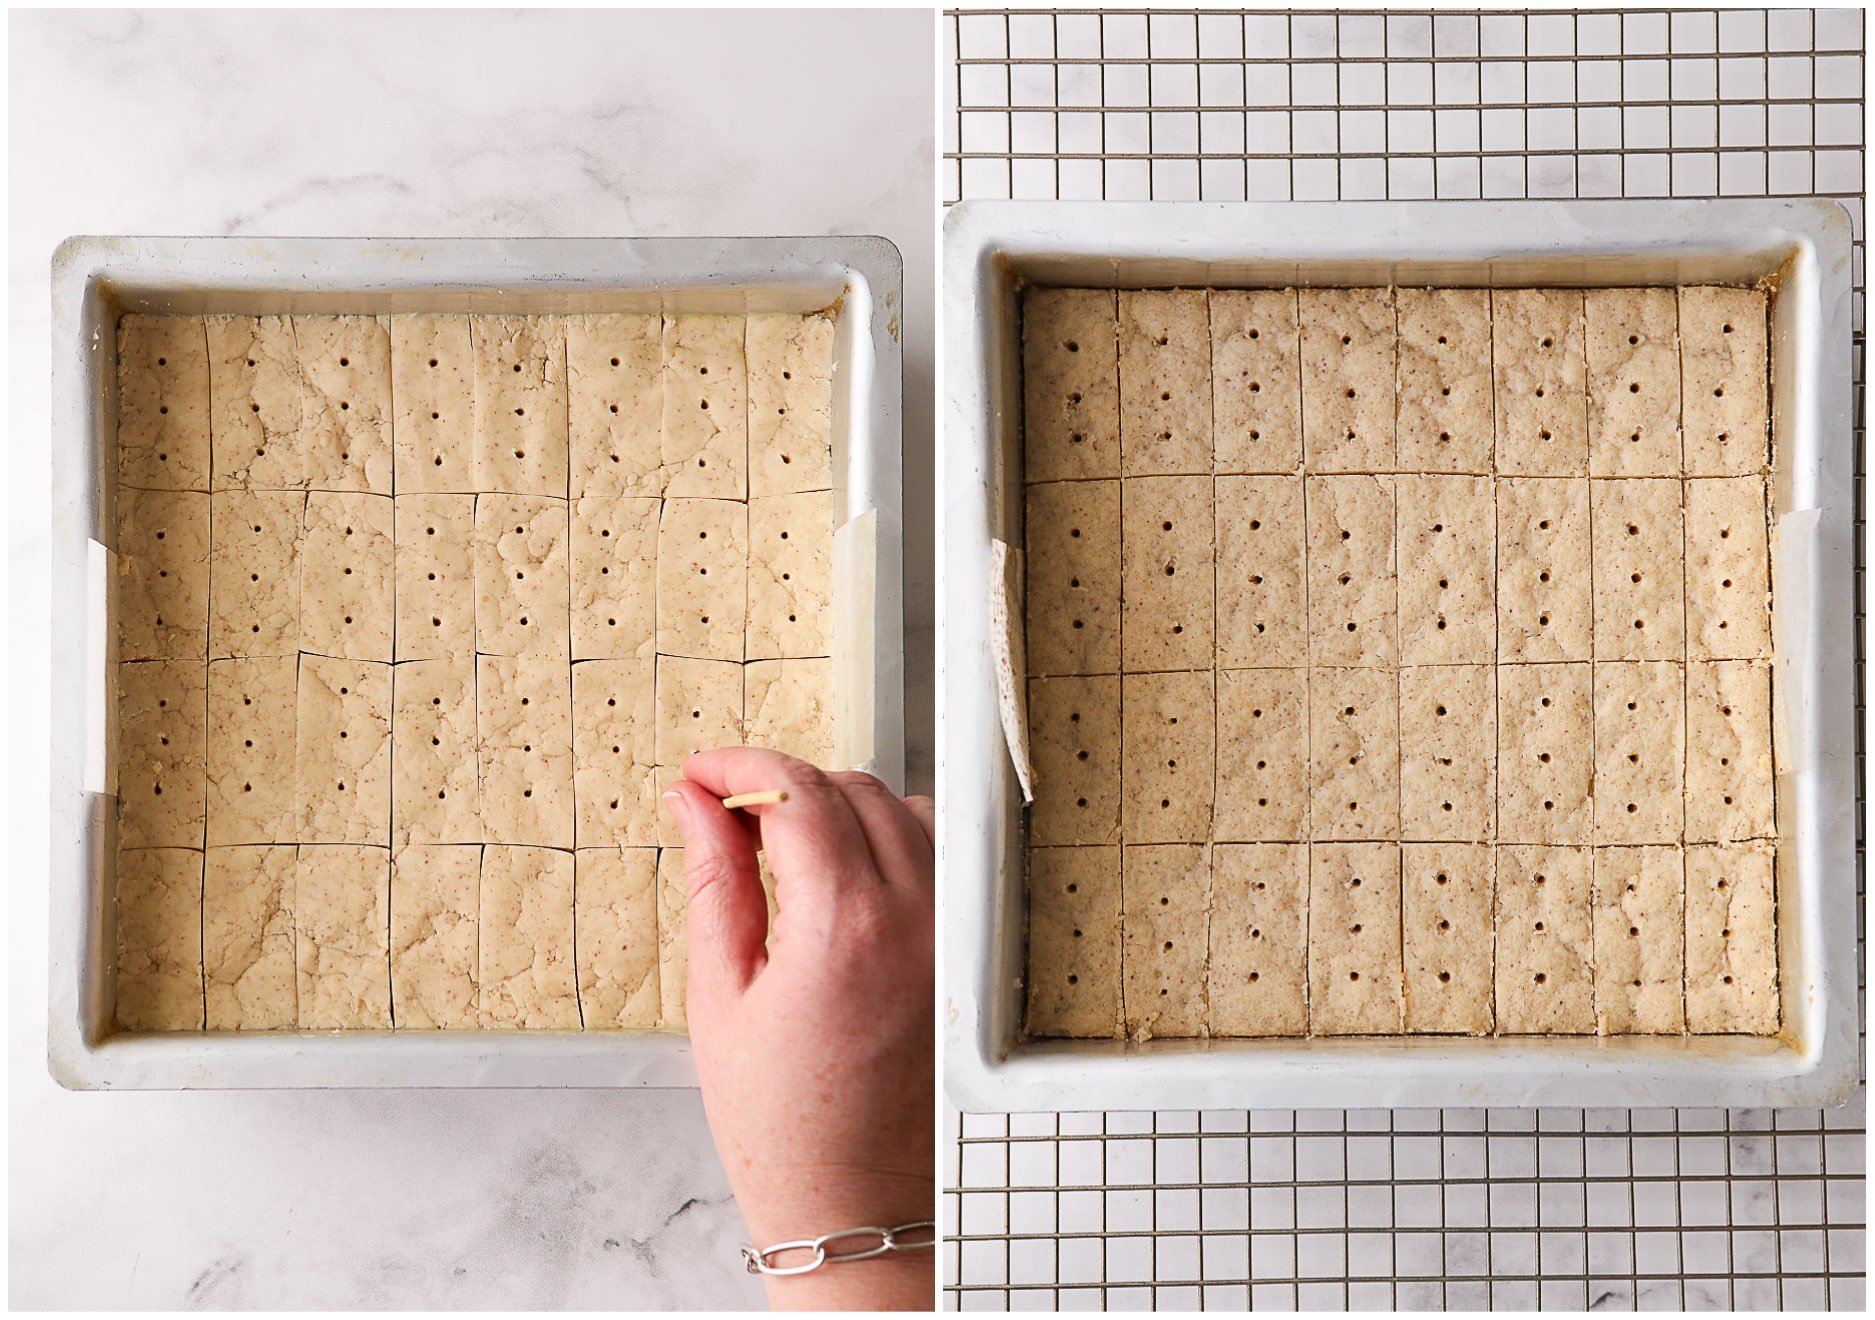 brown butter shortbread before and after baking